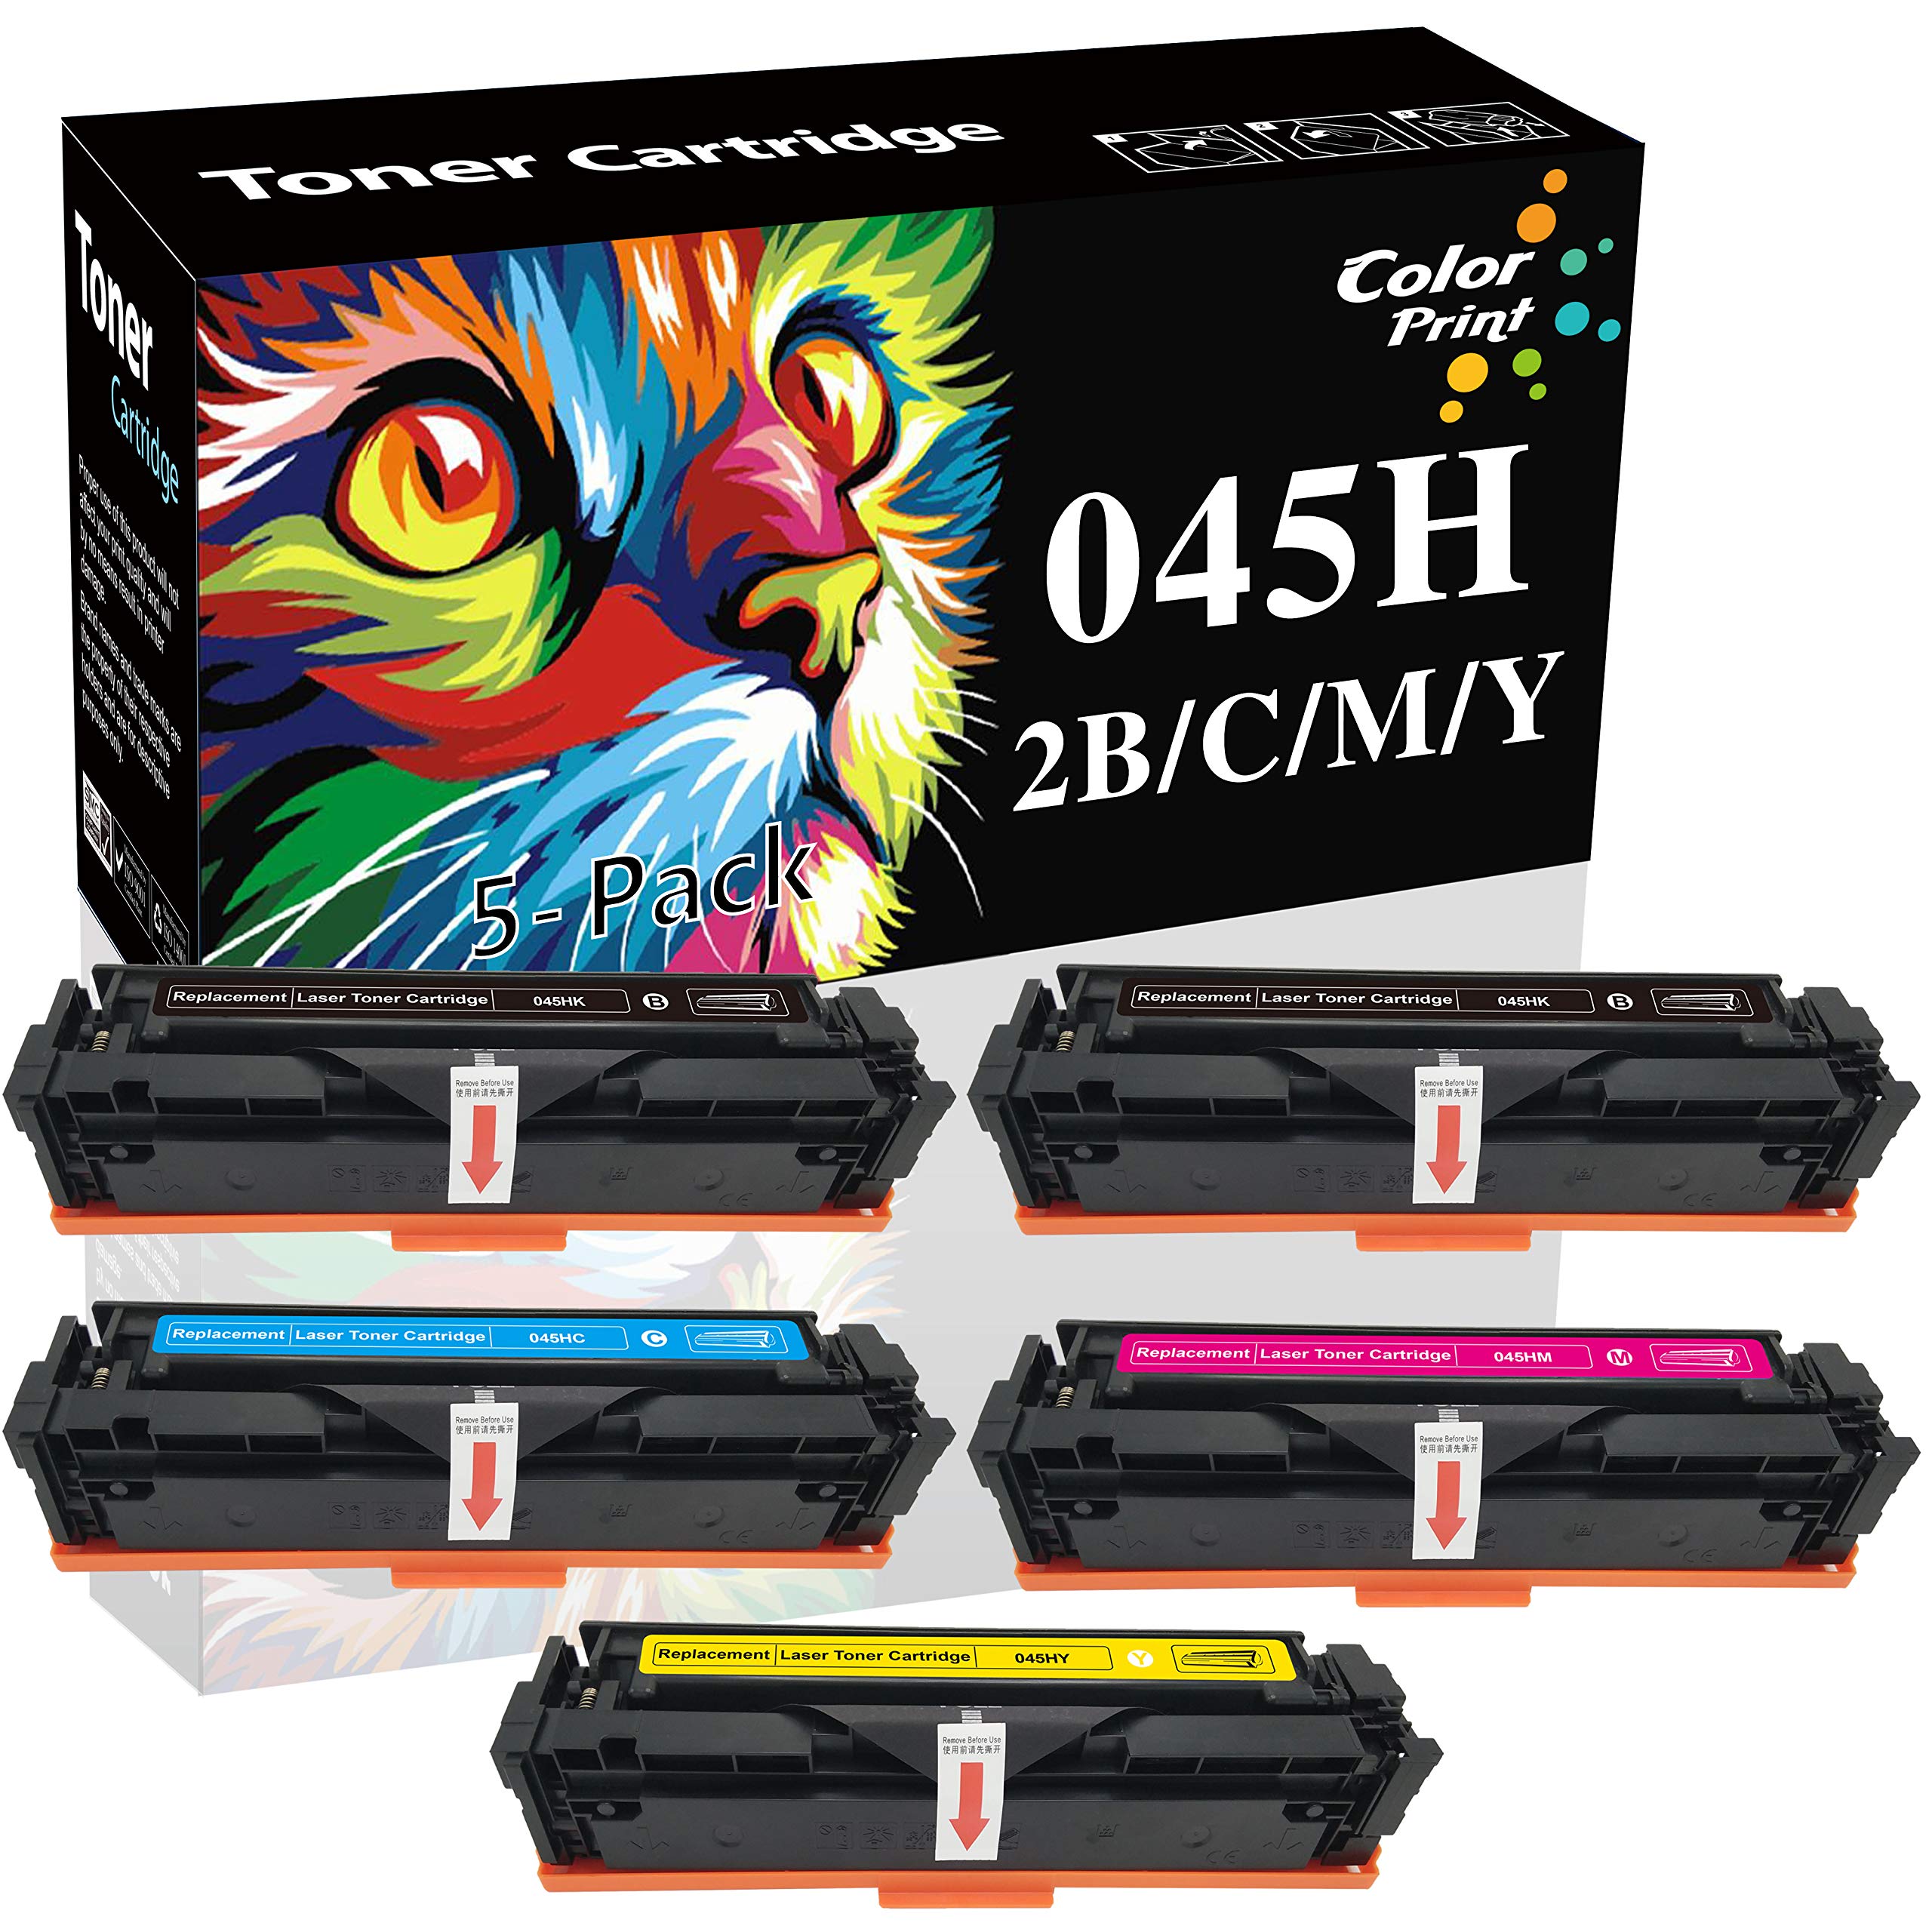 ColorPrint Compatible 045H Toner Cartridges Replacement for CRG-045H CRG045H 045 High Yield CRG-045 Work with Color imageCLASS LBP612CDW MF634CDW M...